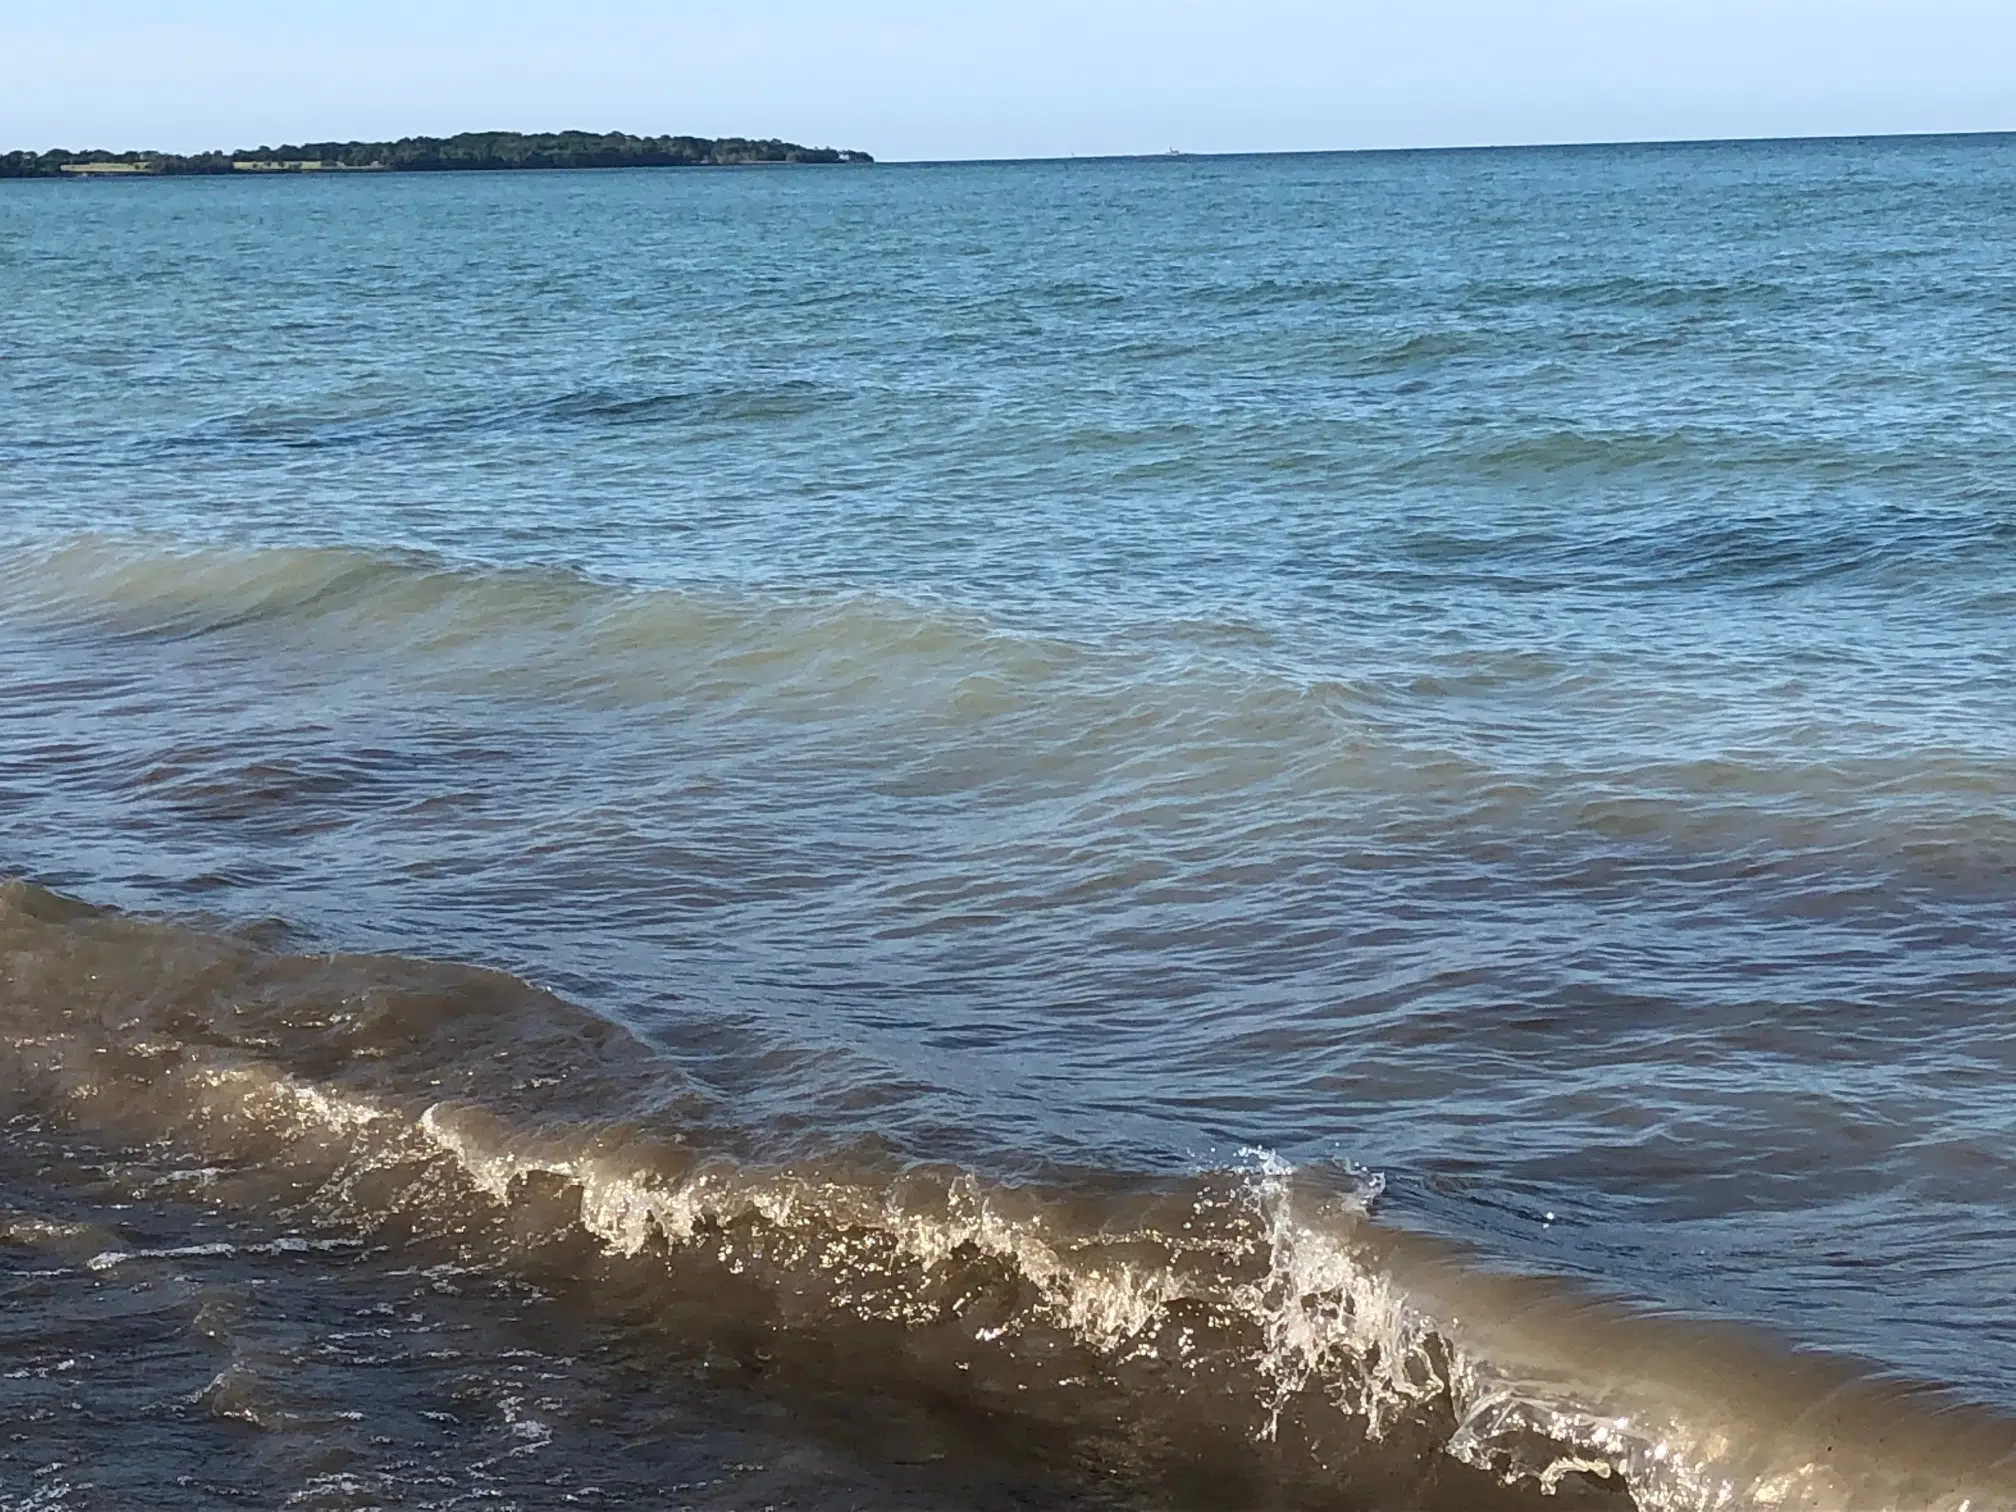 River board says high Lake Ontario water levels foreseeable as wet conditions persist